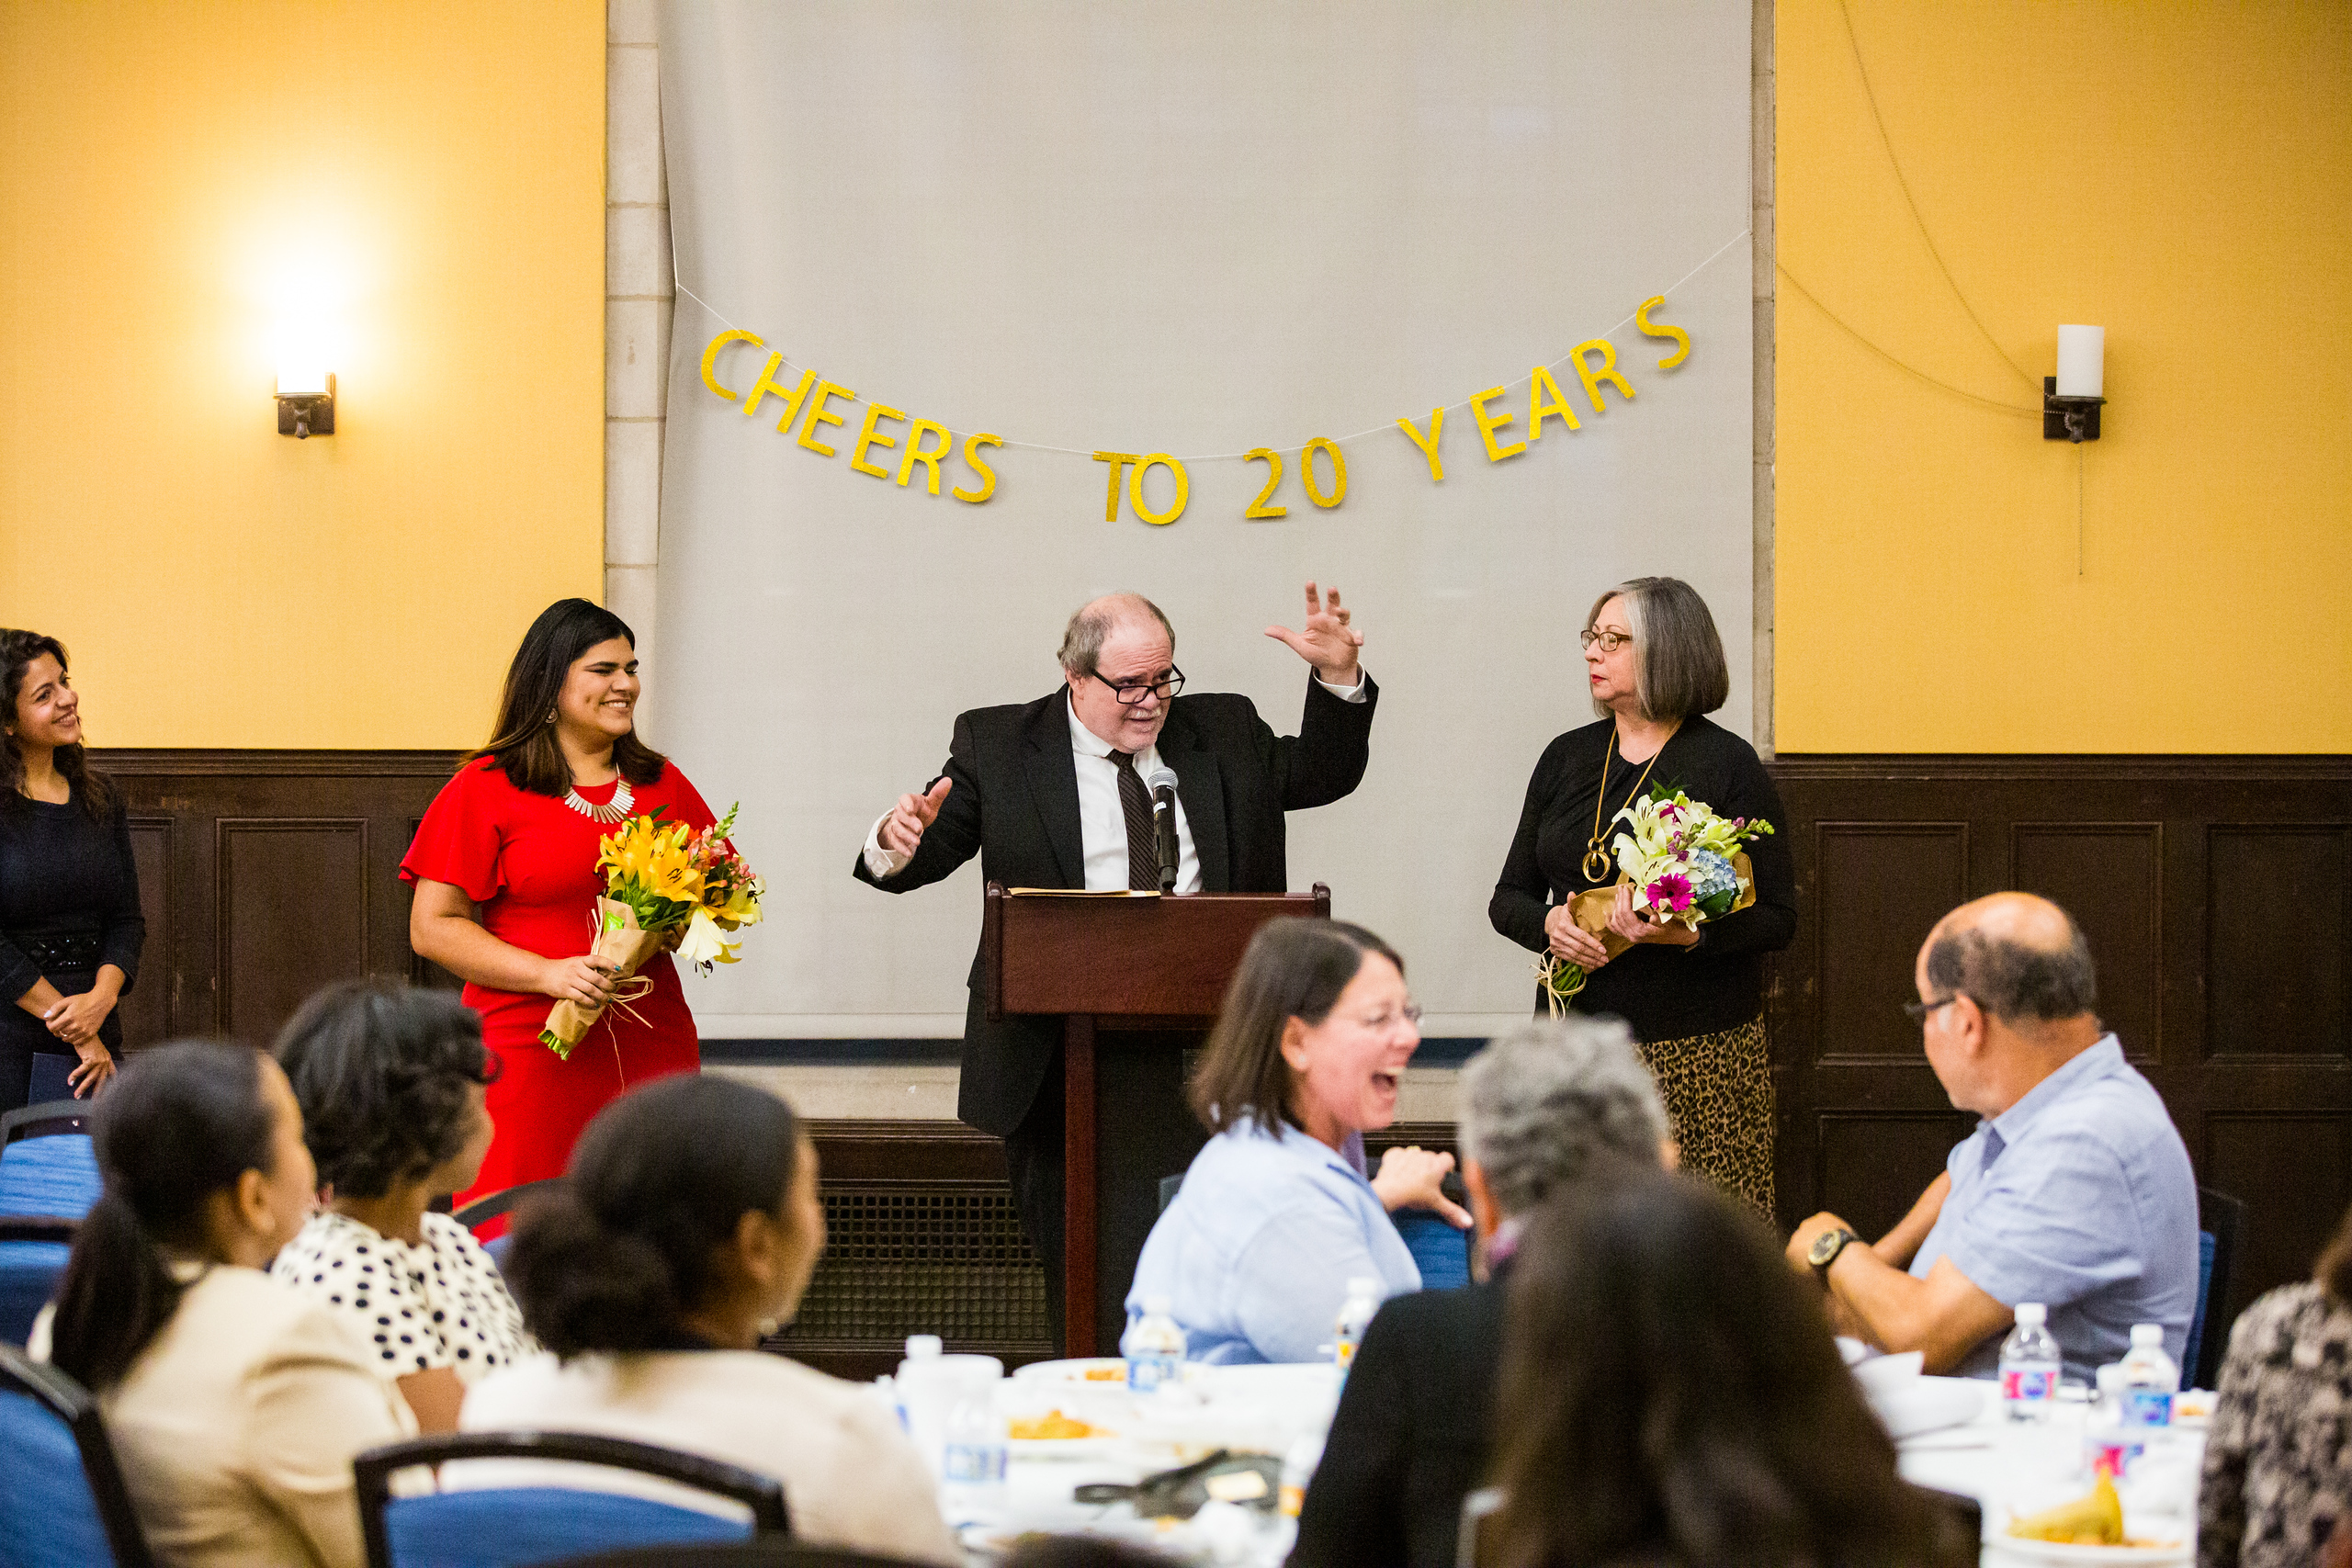 A banner reading "cheers to 20 years" hangs behind a man (center) and three women at a podium